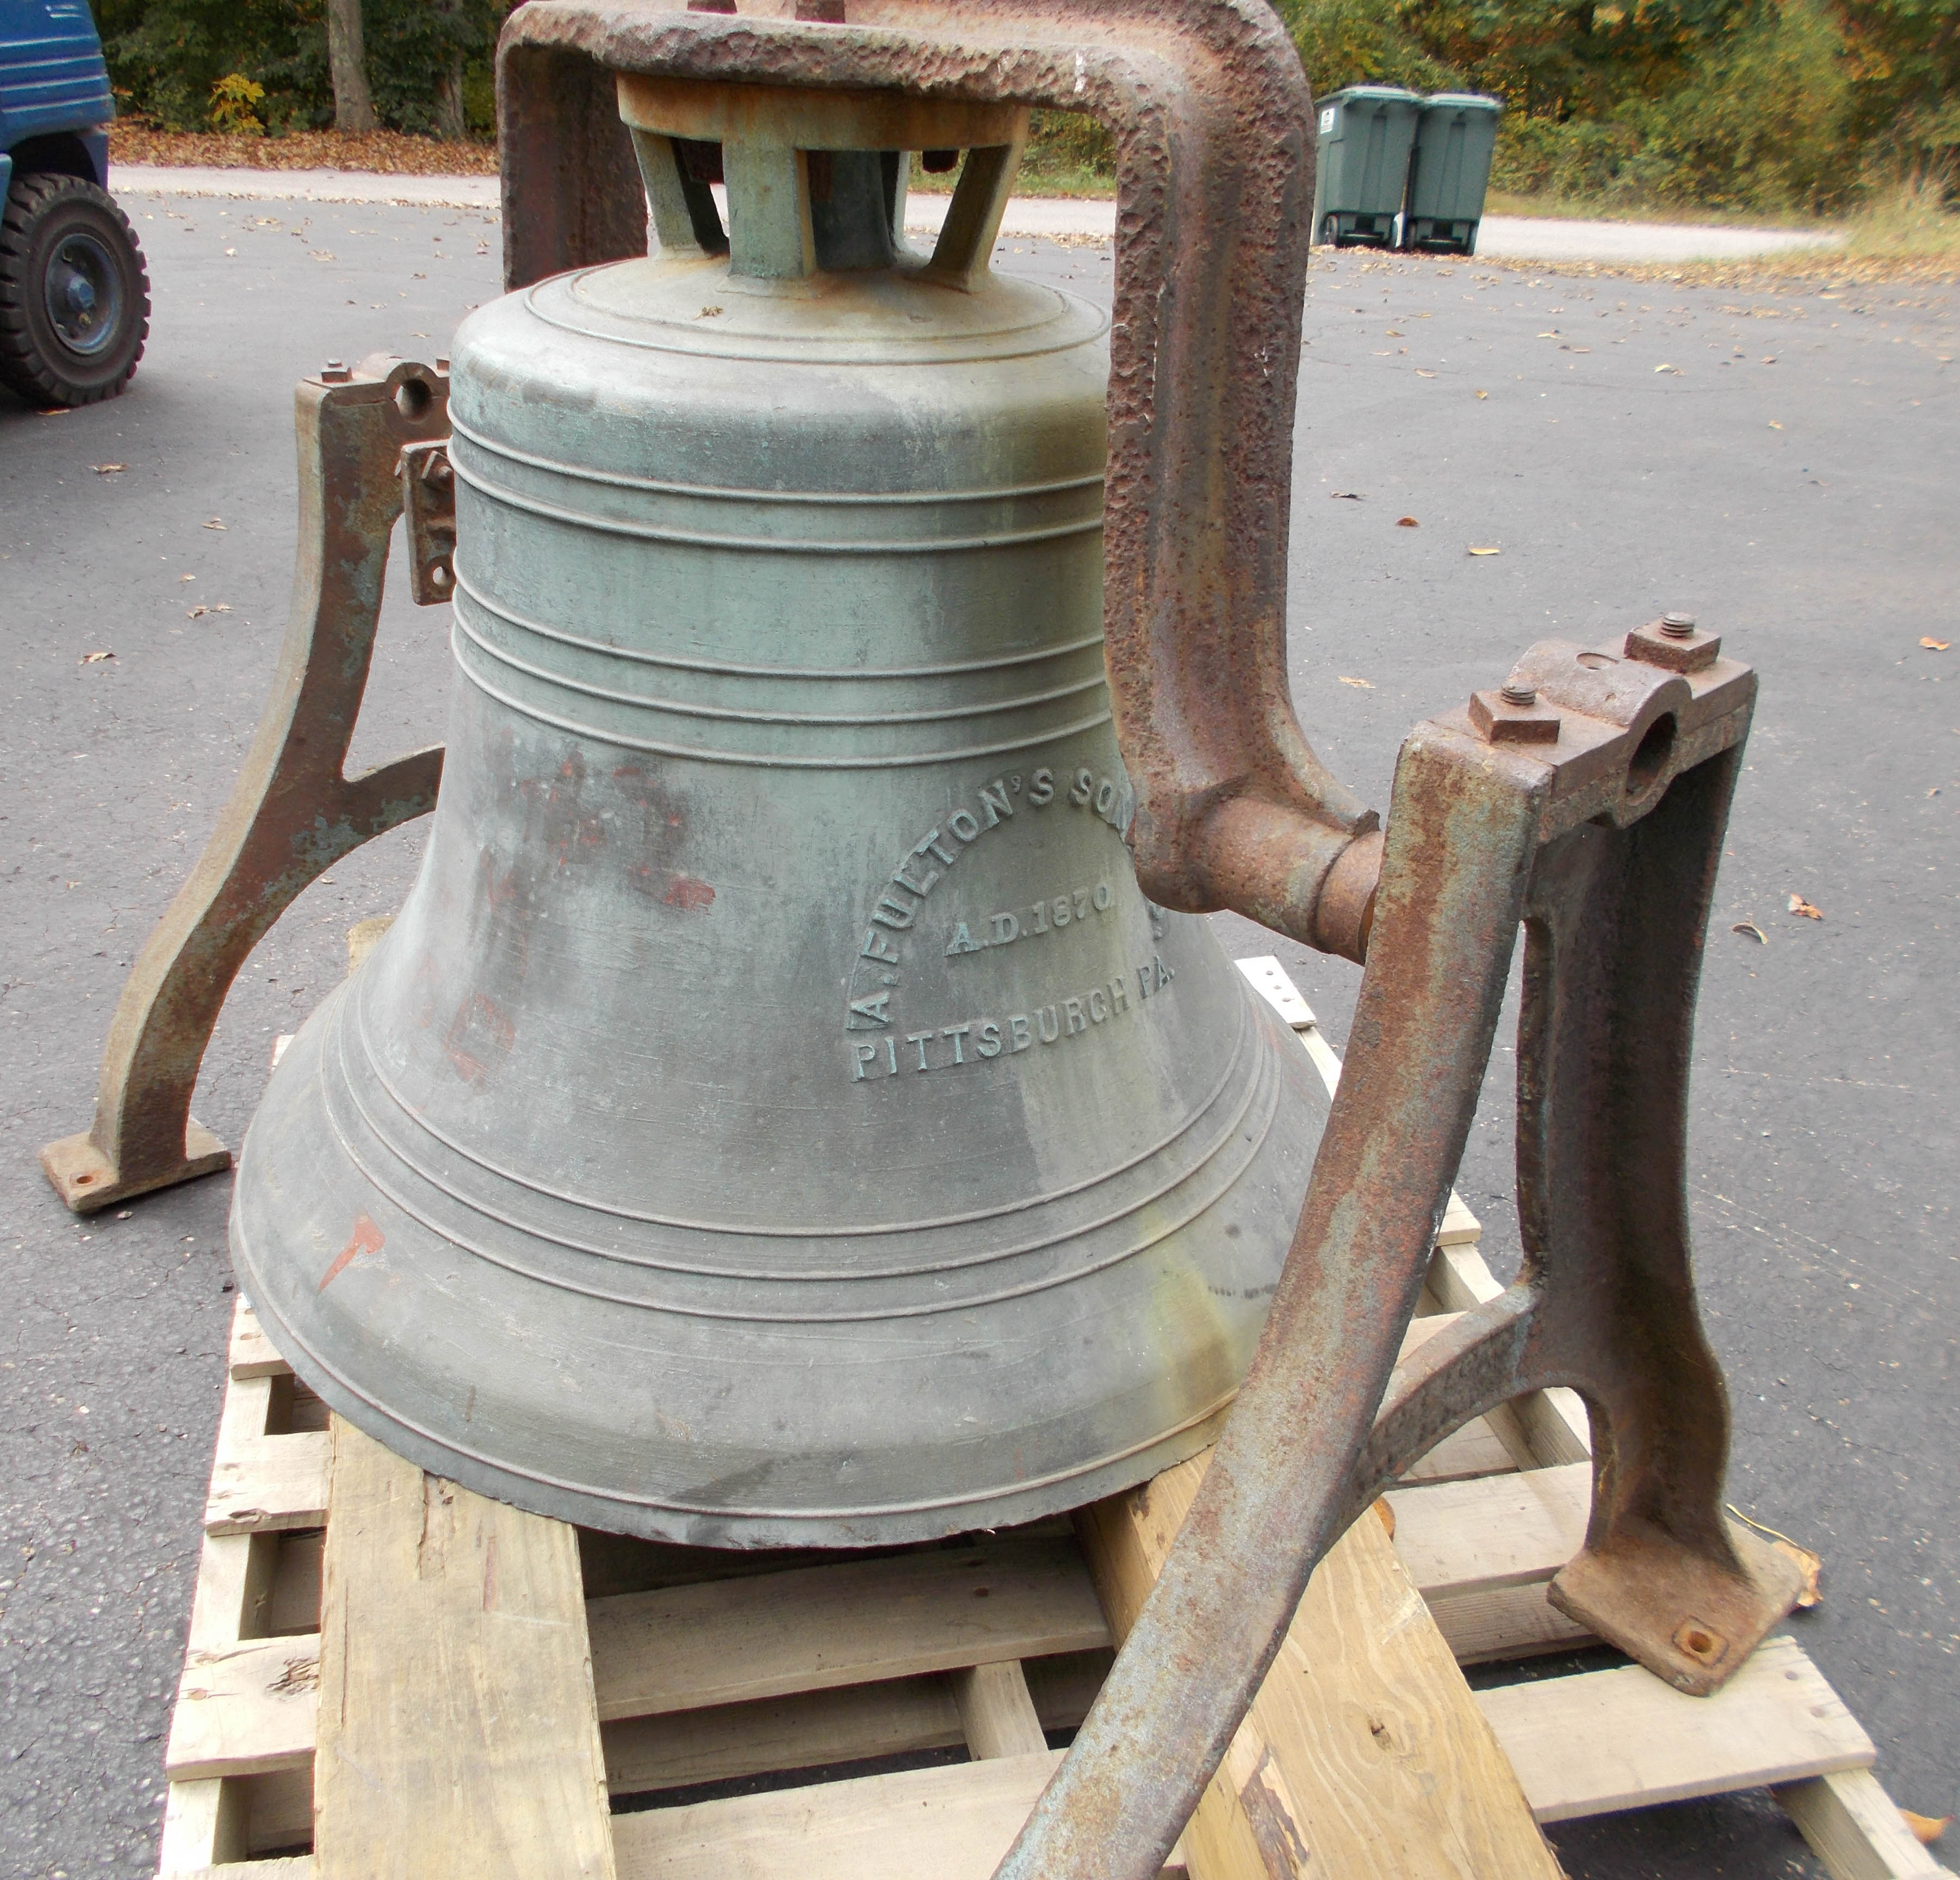 https://churchspecialtiesllc.com/wp-content/uploads/2014/11/Fulton-Sons-1870-Bell-from-Pittsburgh-PA-for-sale.jpg